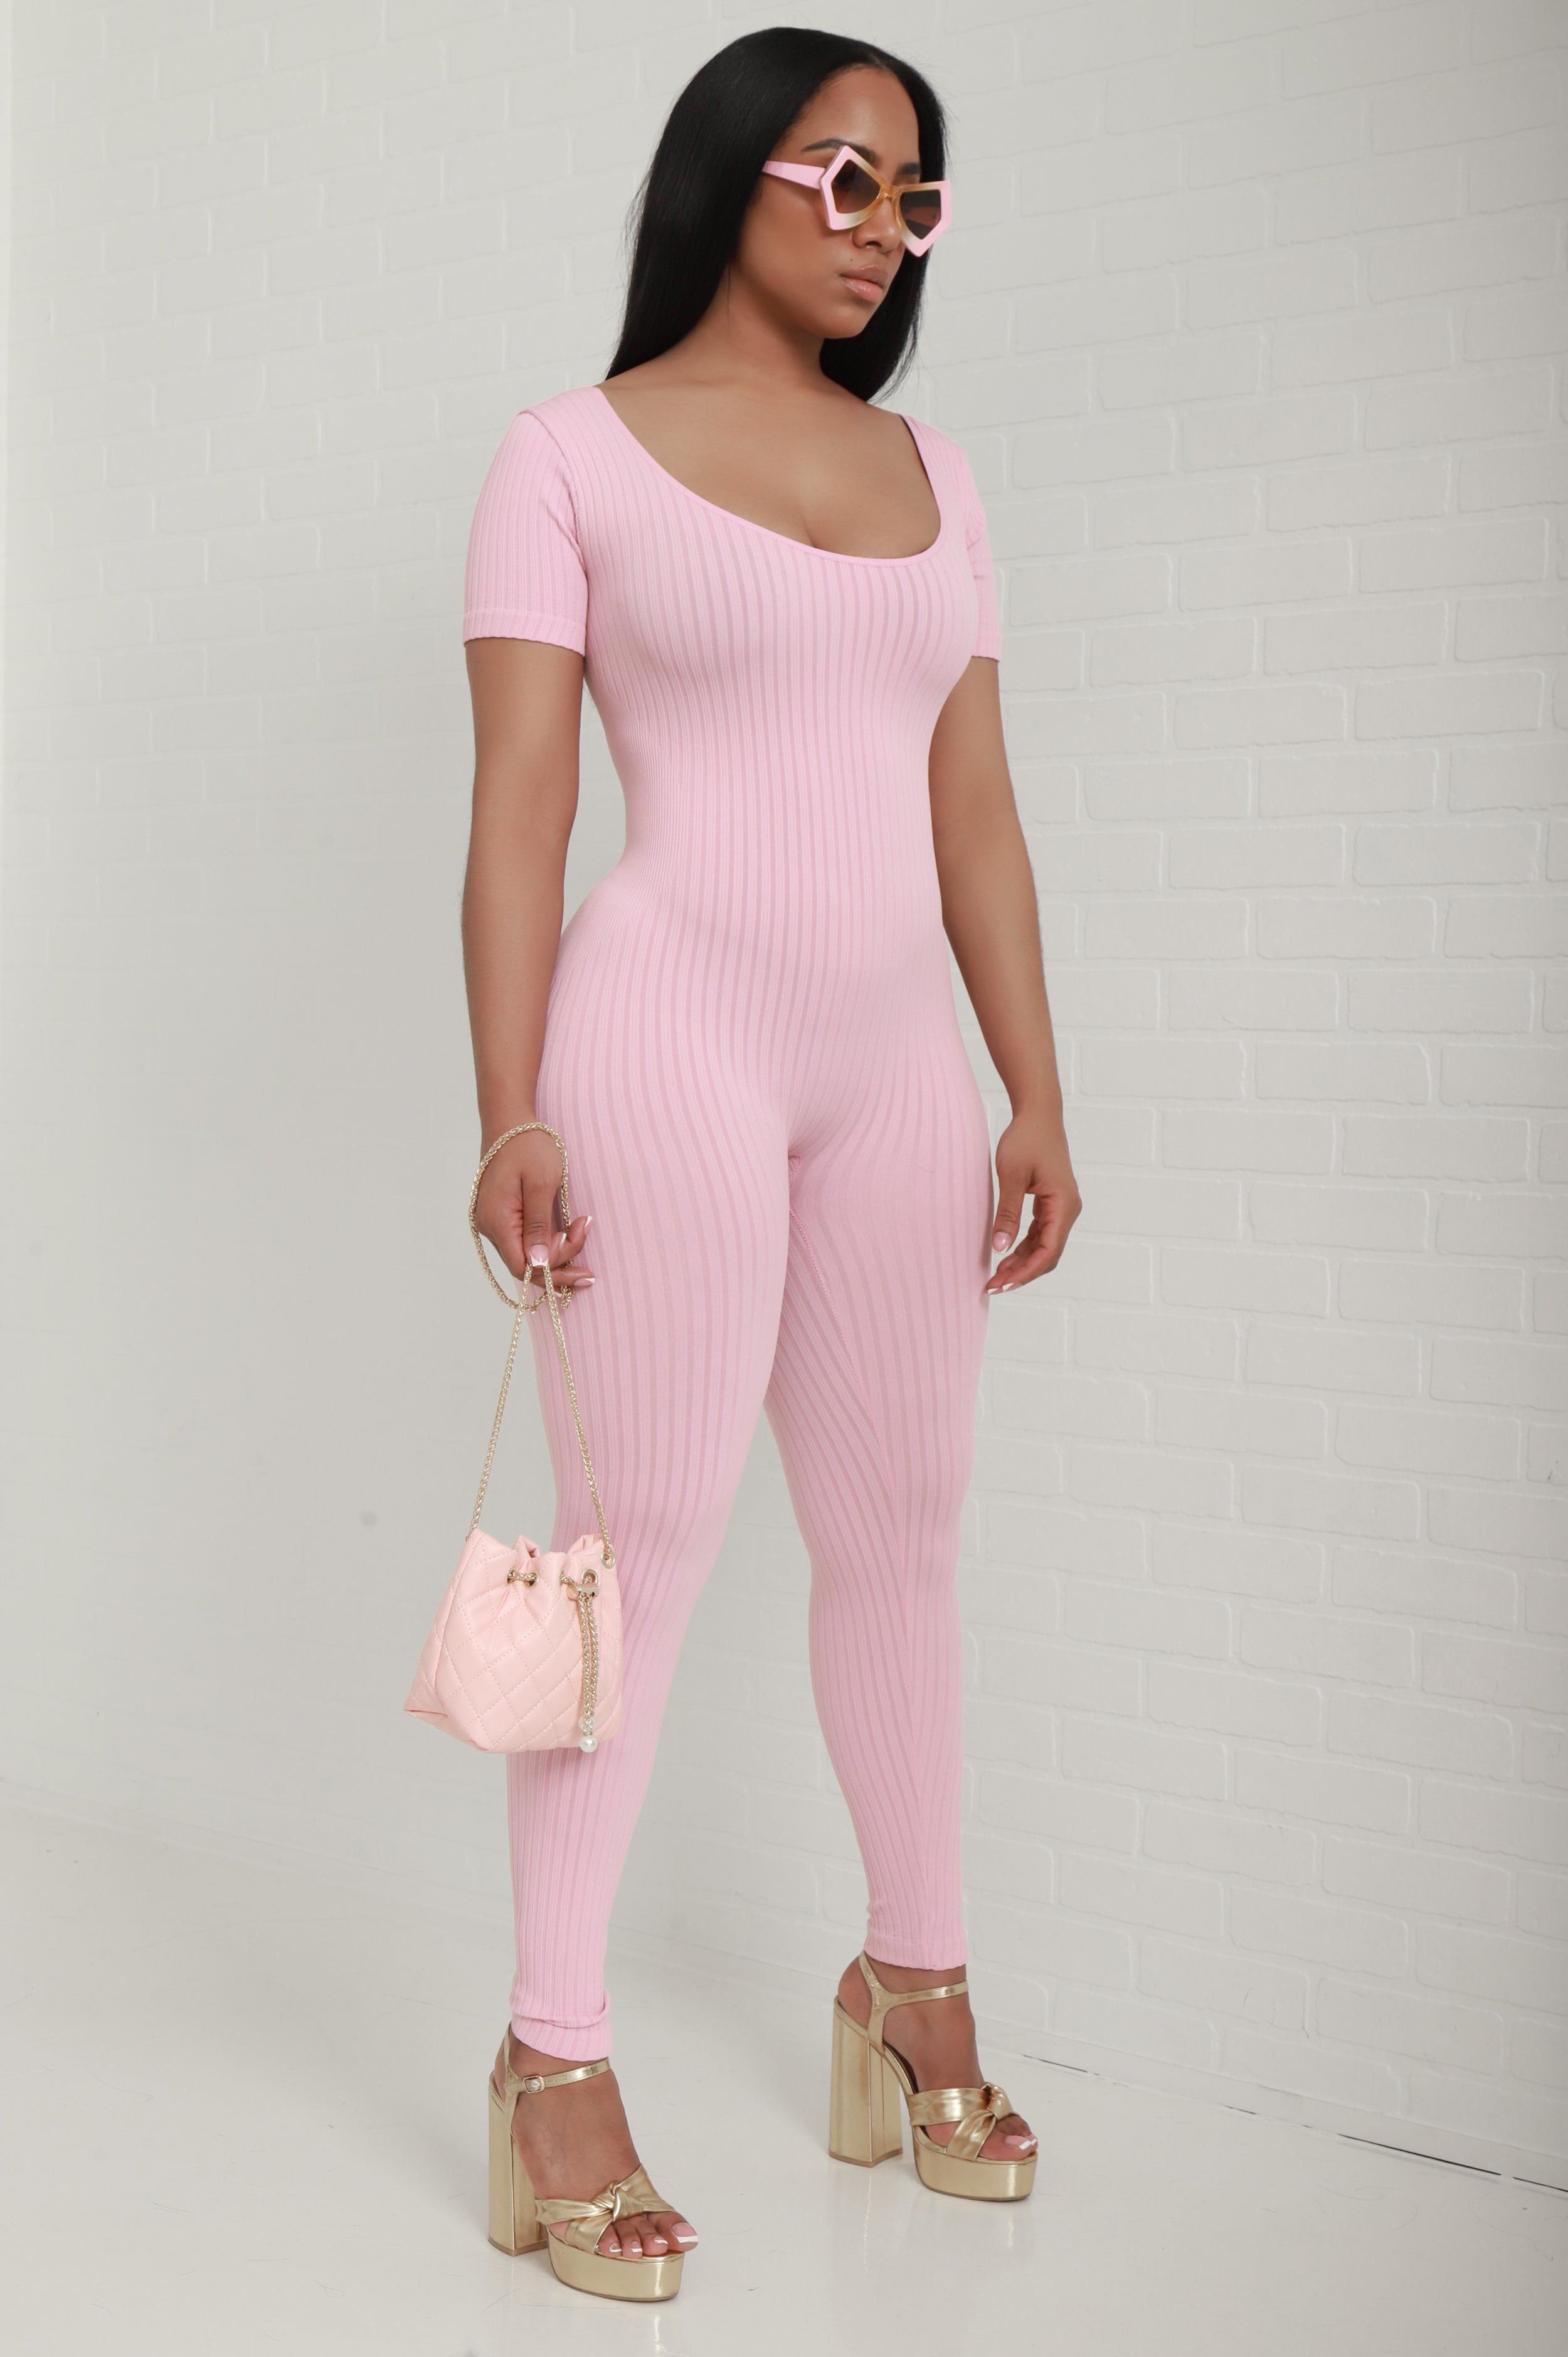 Woord commando duisternis Hustle Hard Short Sleeve Ribbed Jumpsuit - Baby Pink - Swank A Posh